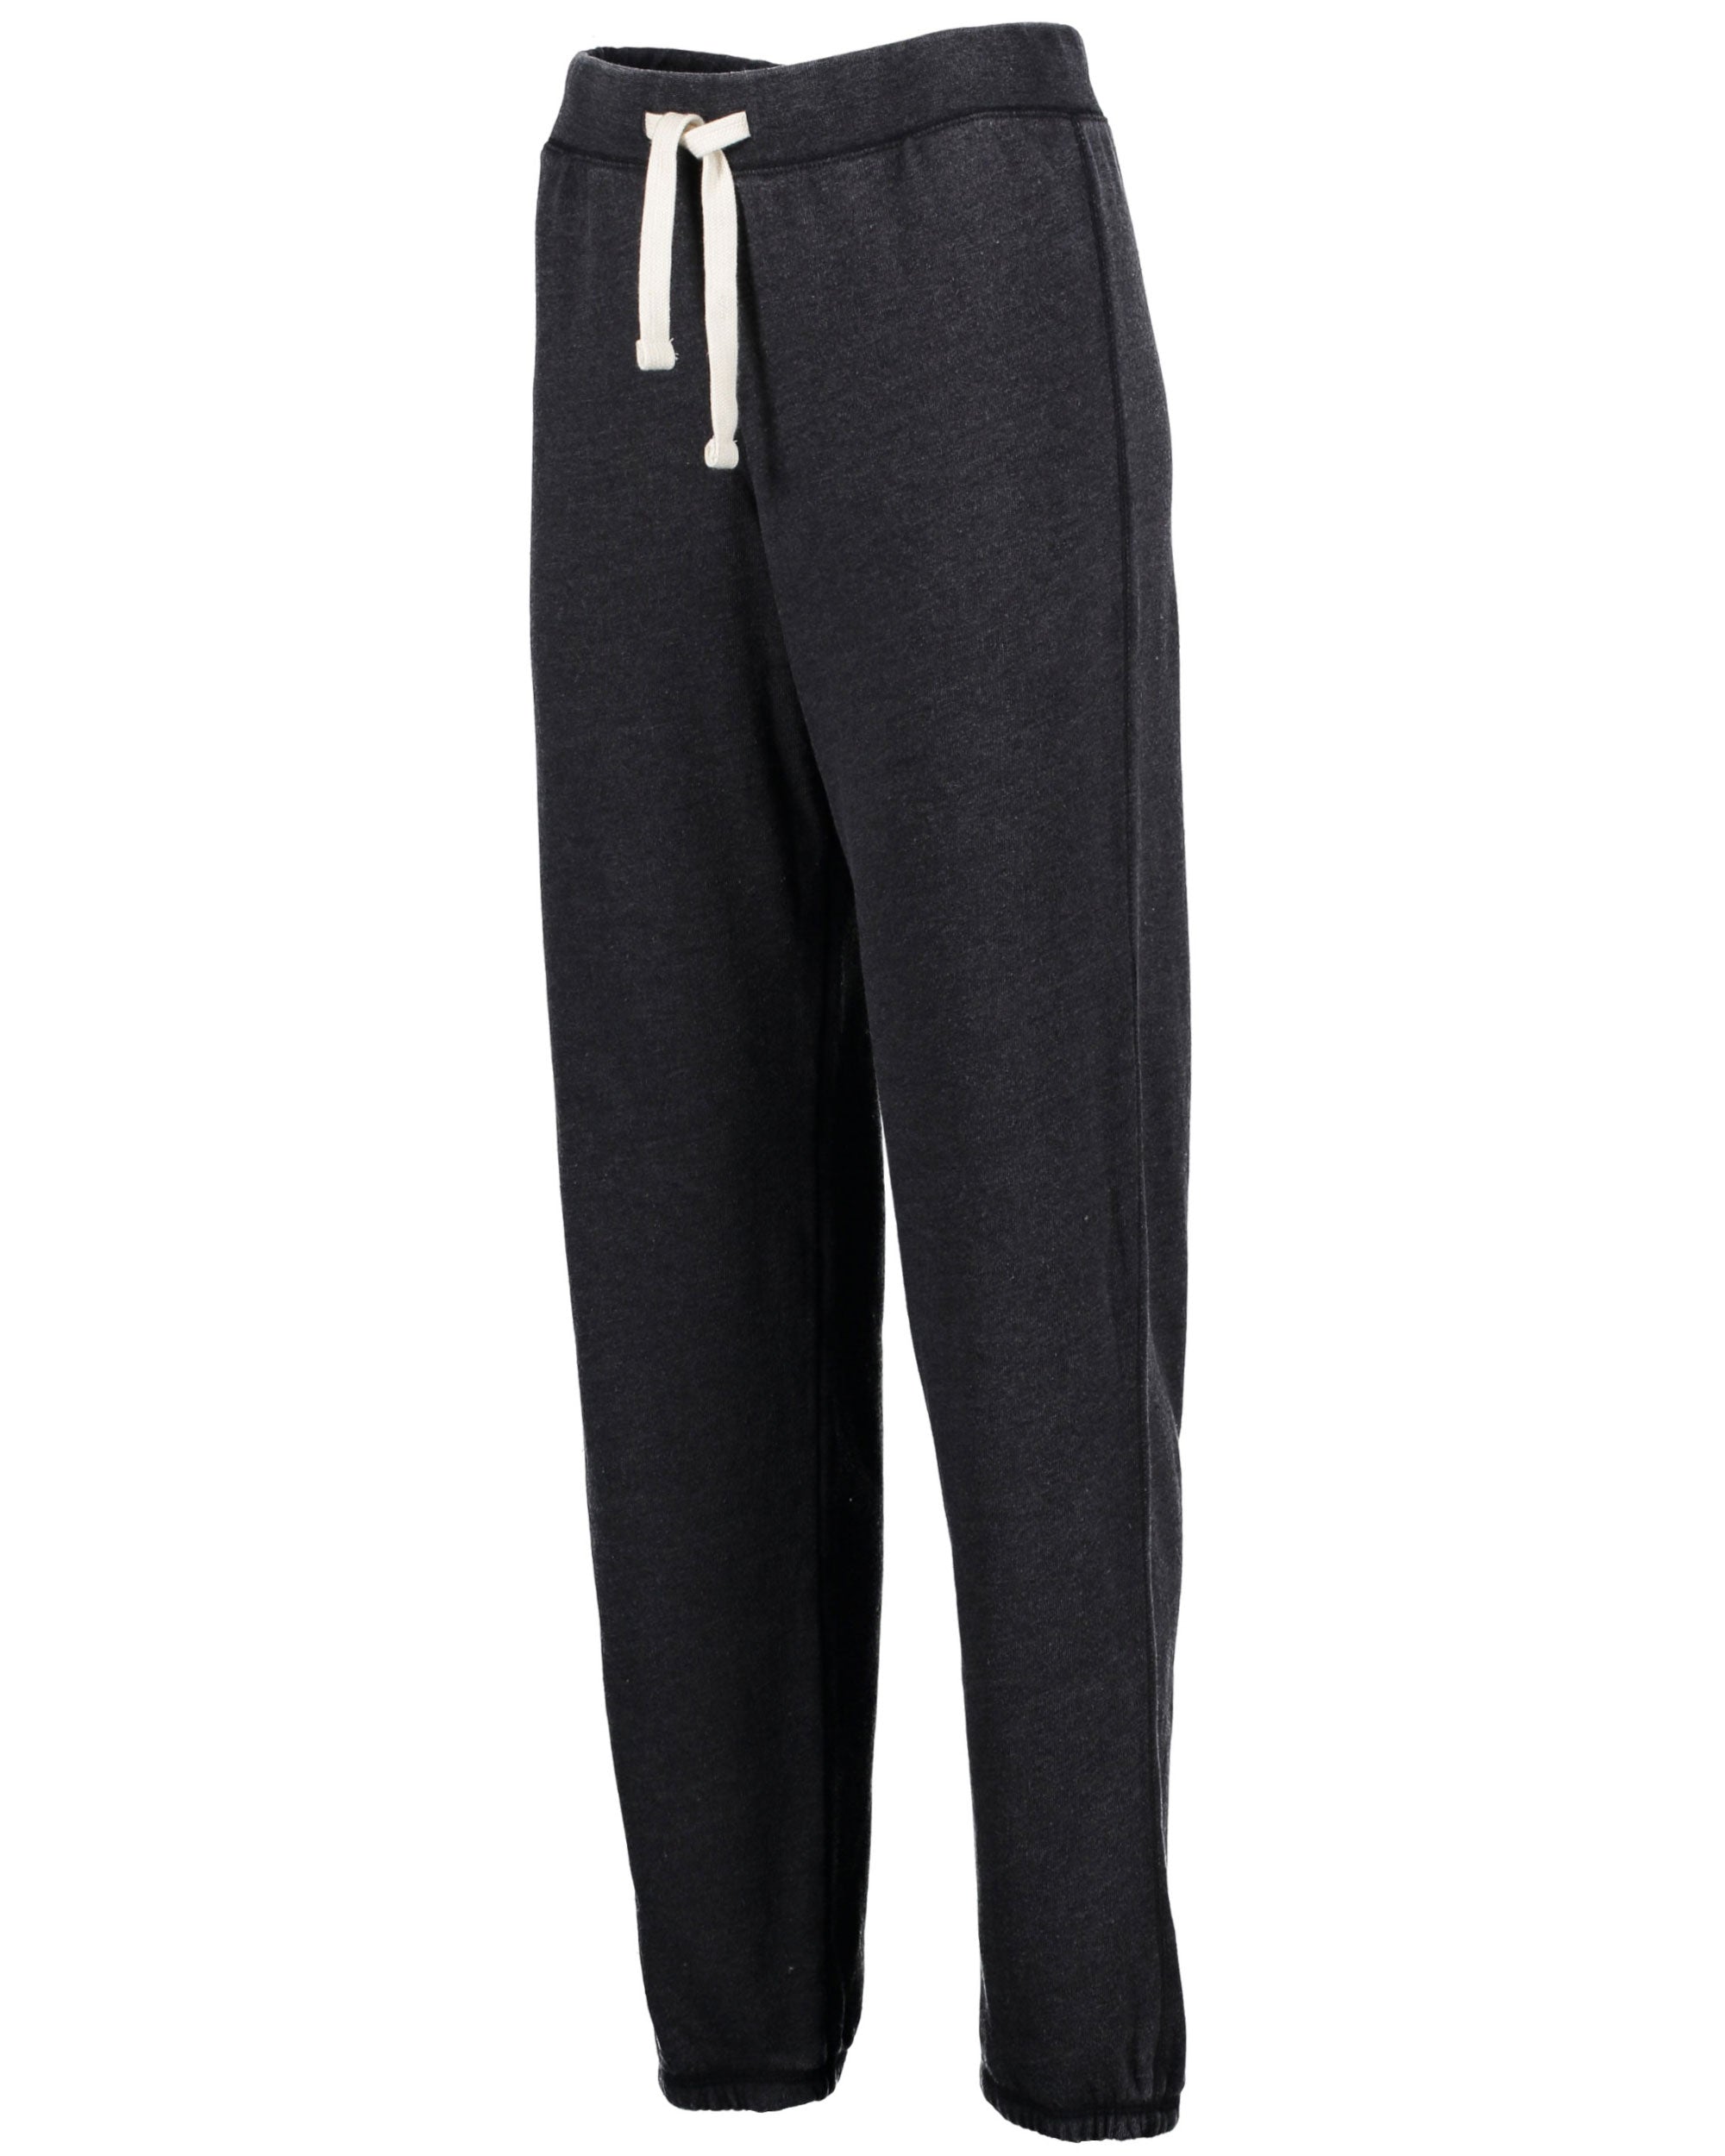 The Composite French Terry Jogger